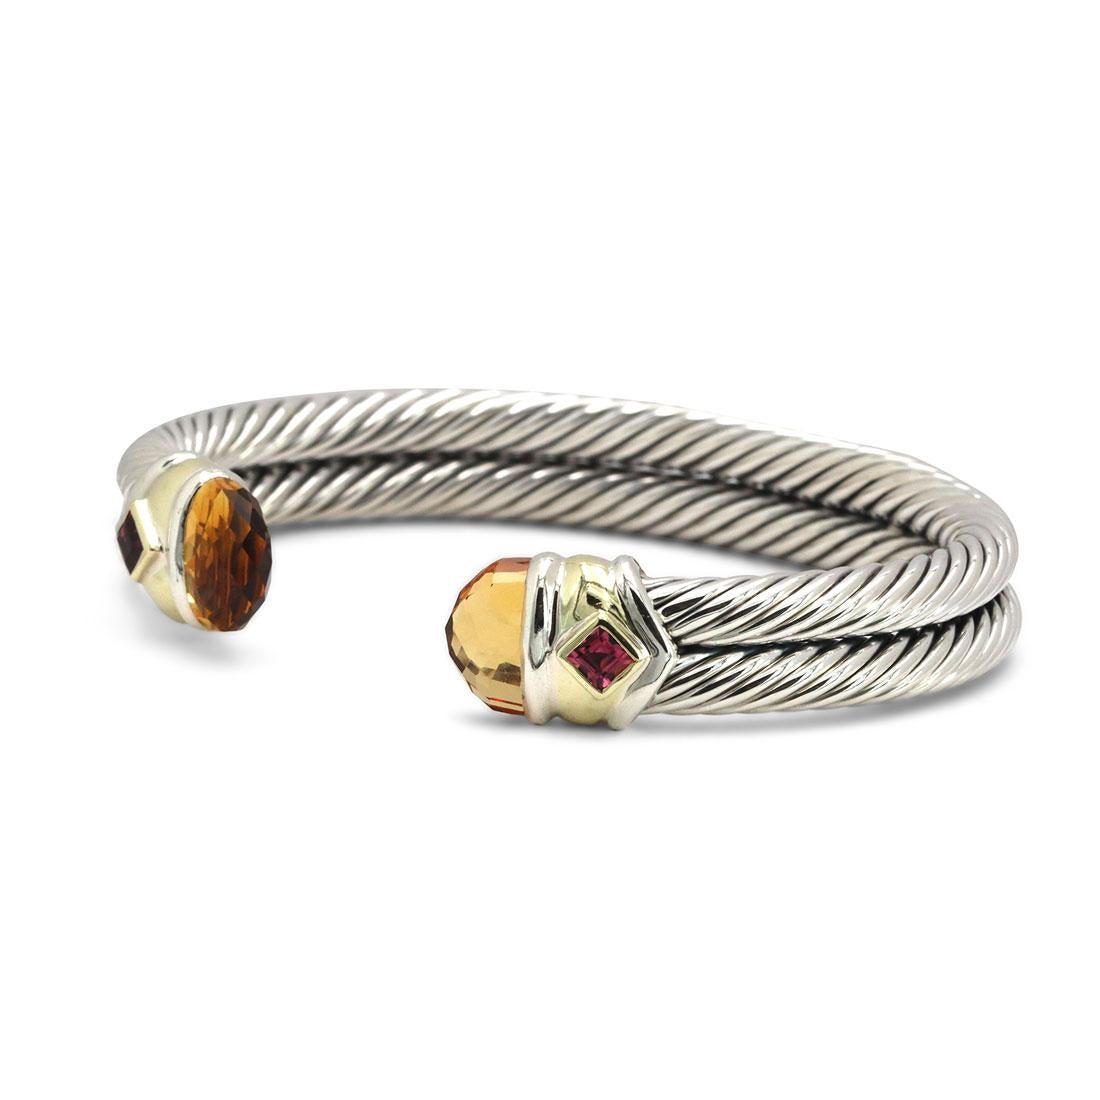 Authentic David Yurman Renaissance Cable bracelet, crafted in sterling silver and 14 karat yellow gold. Featuring two faceted Citrine stones along with pink Tourmaline stones on each end.  Bracelet measures 9.8mm in width and can fit up to a size 5